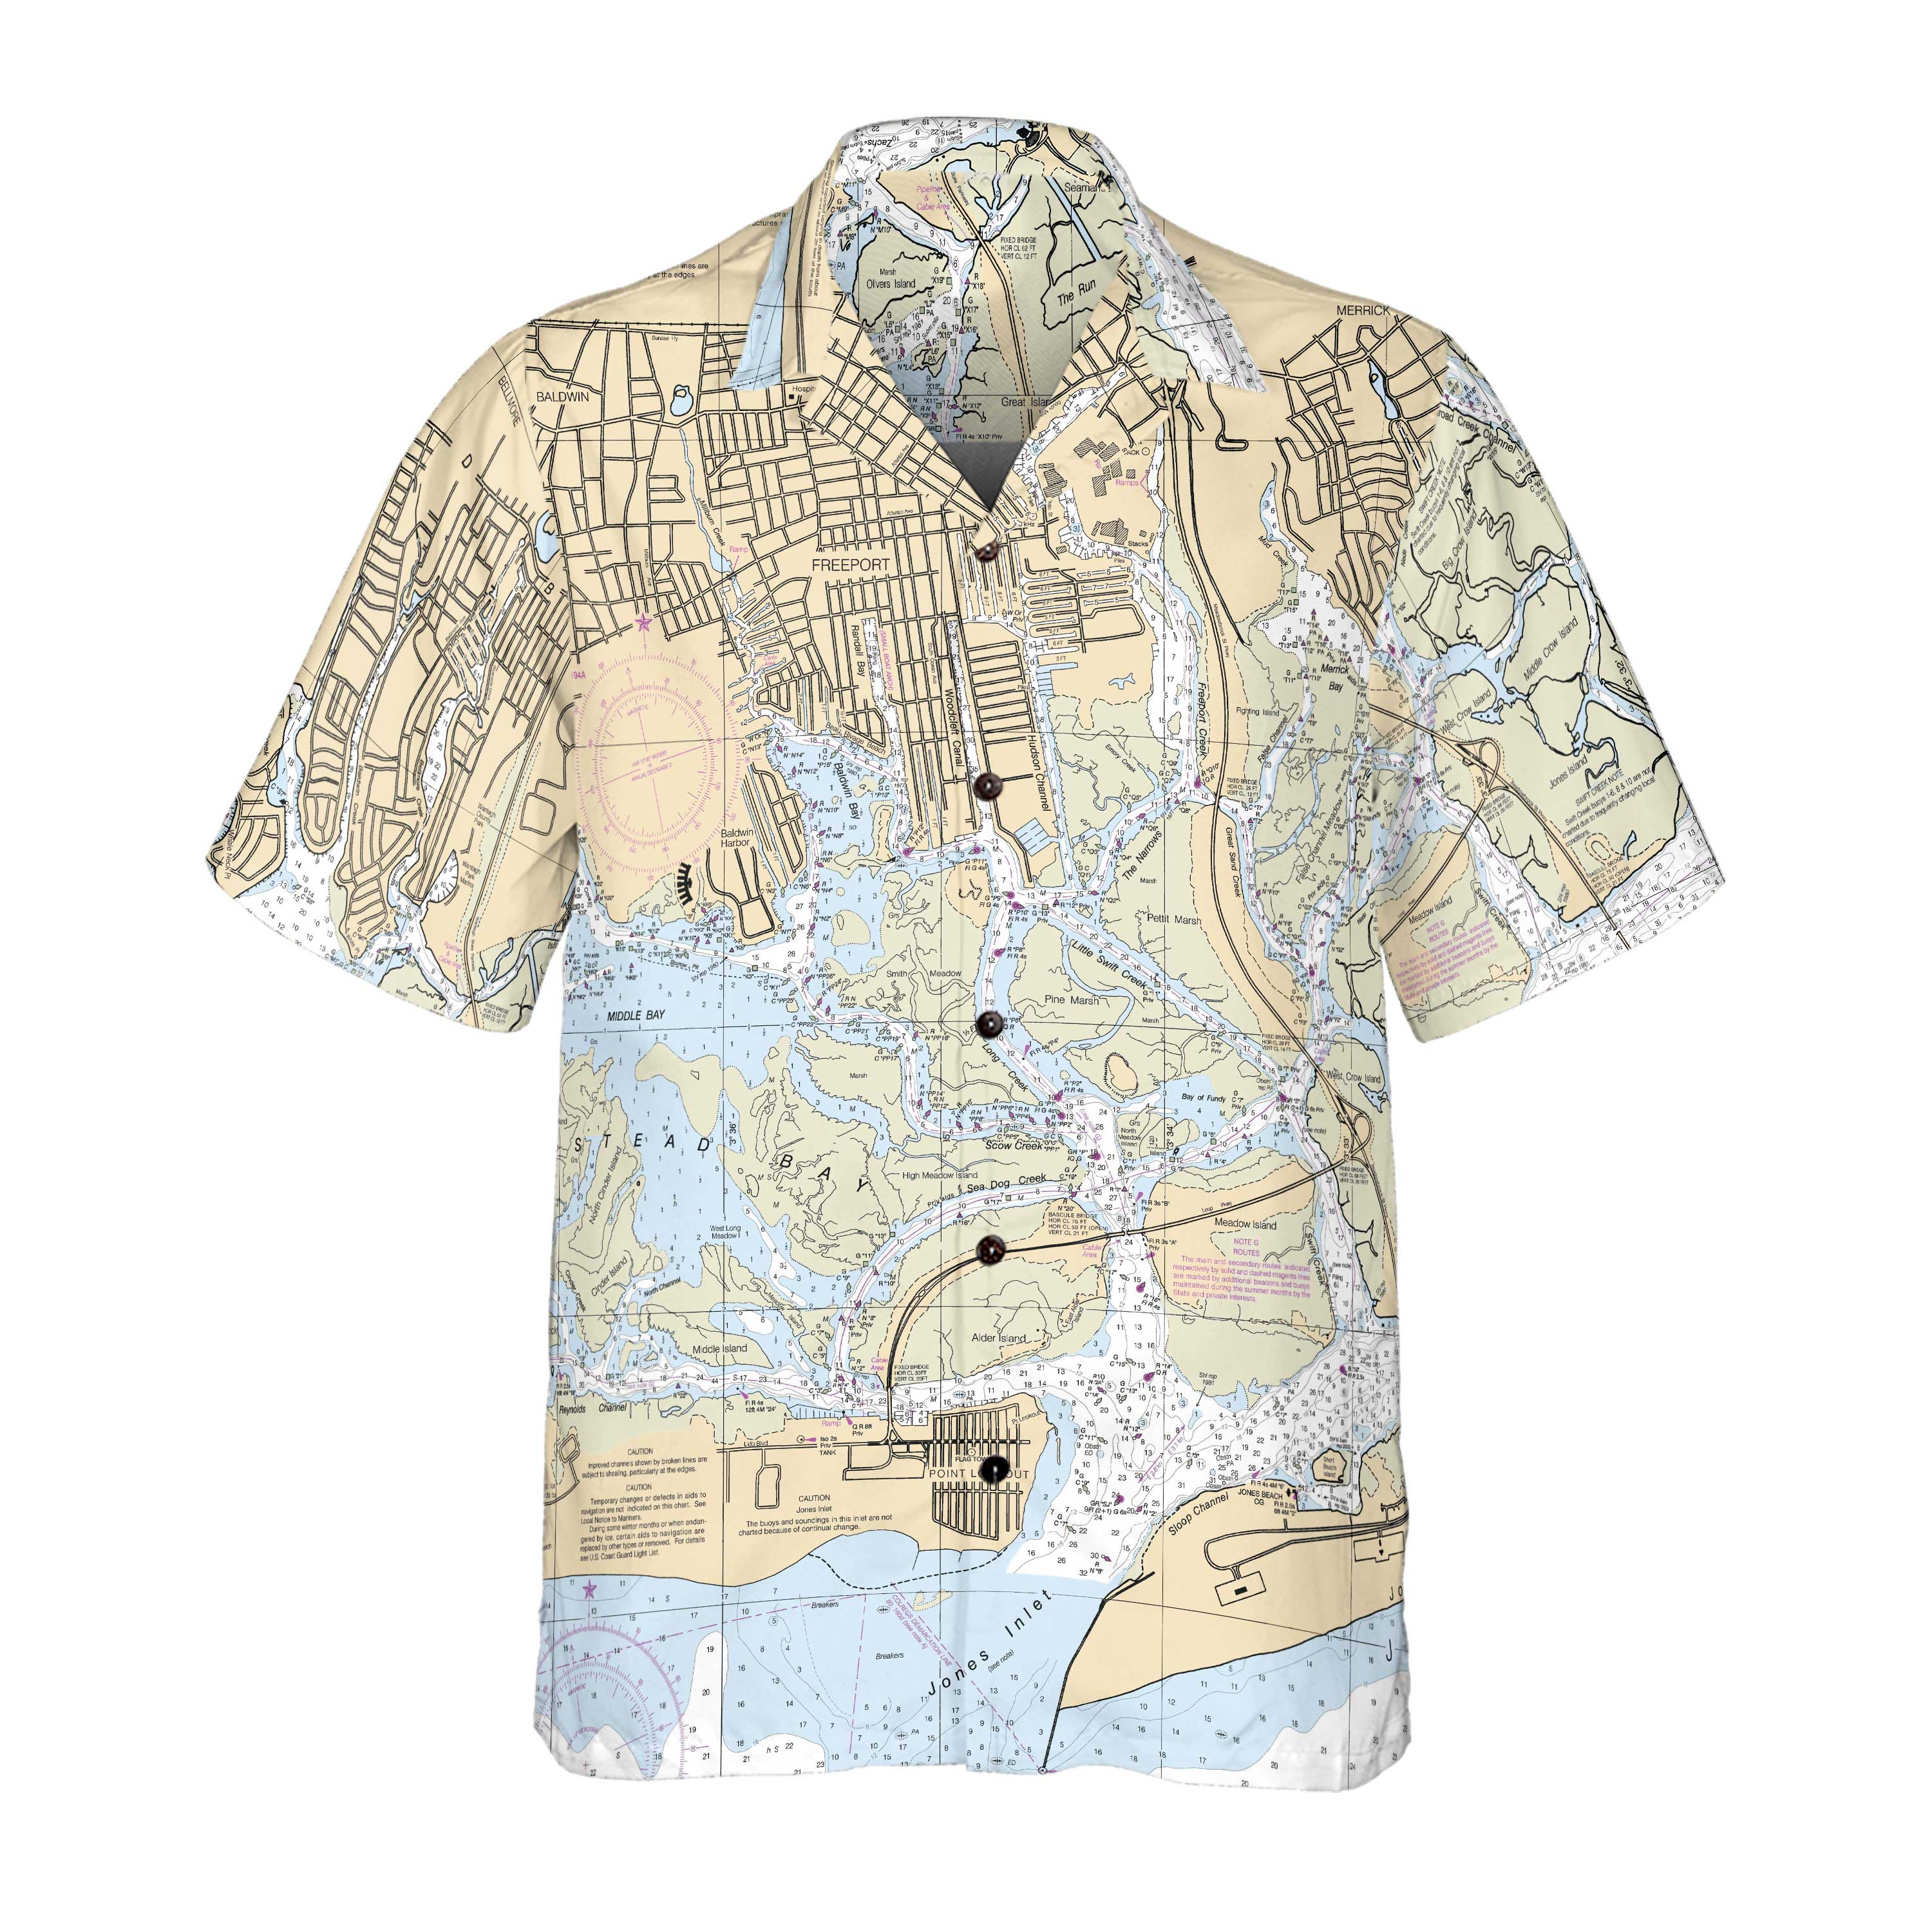 The Freeport Long Island Coconut Button Camp Shirt